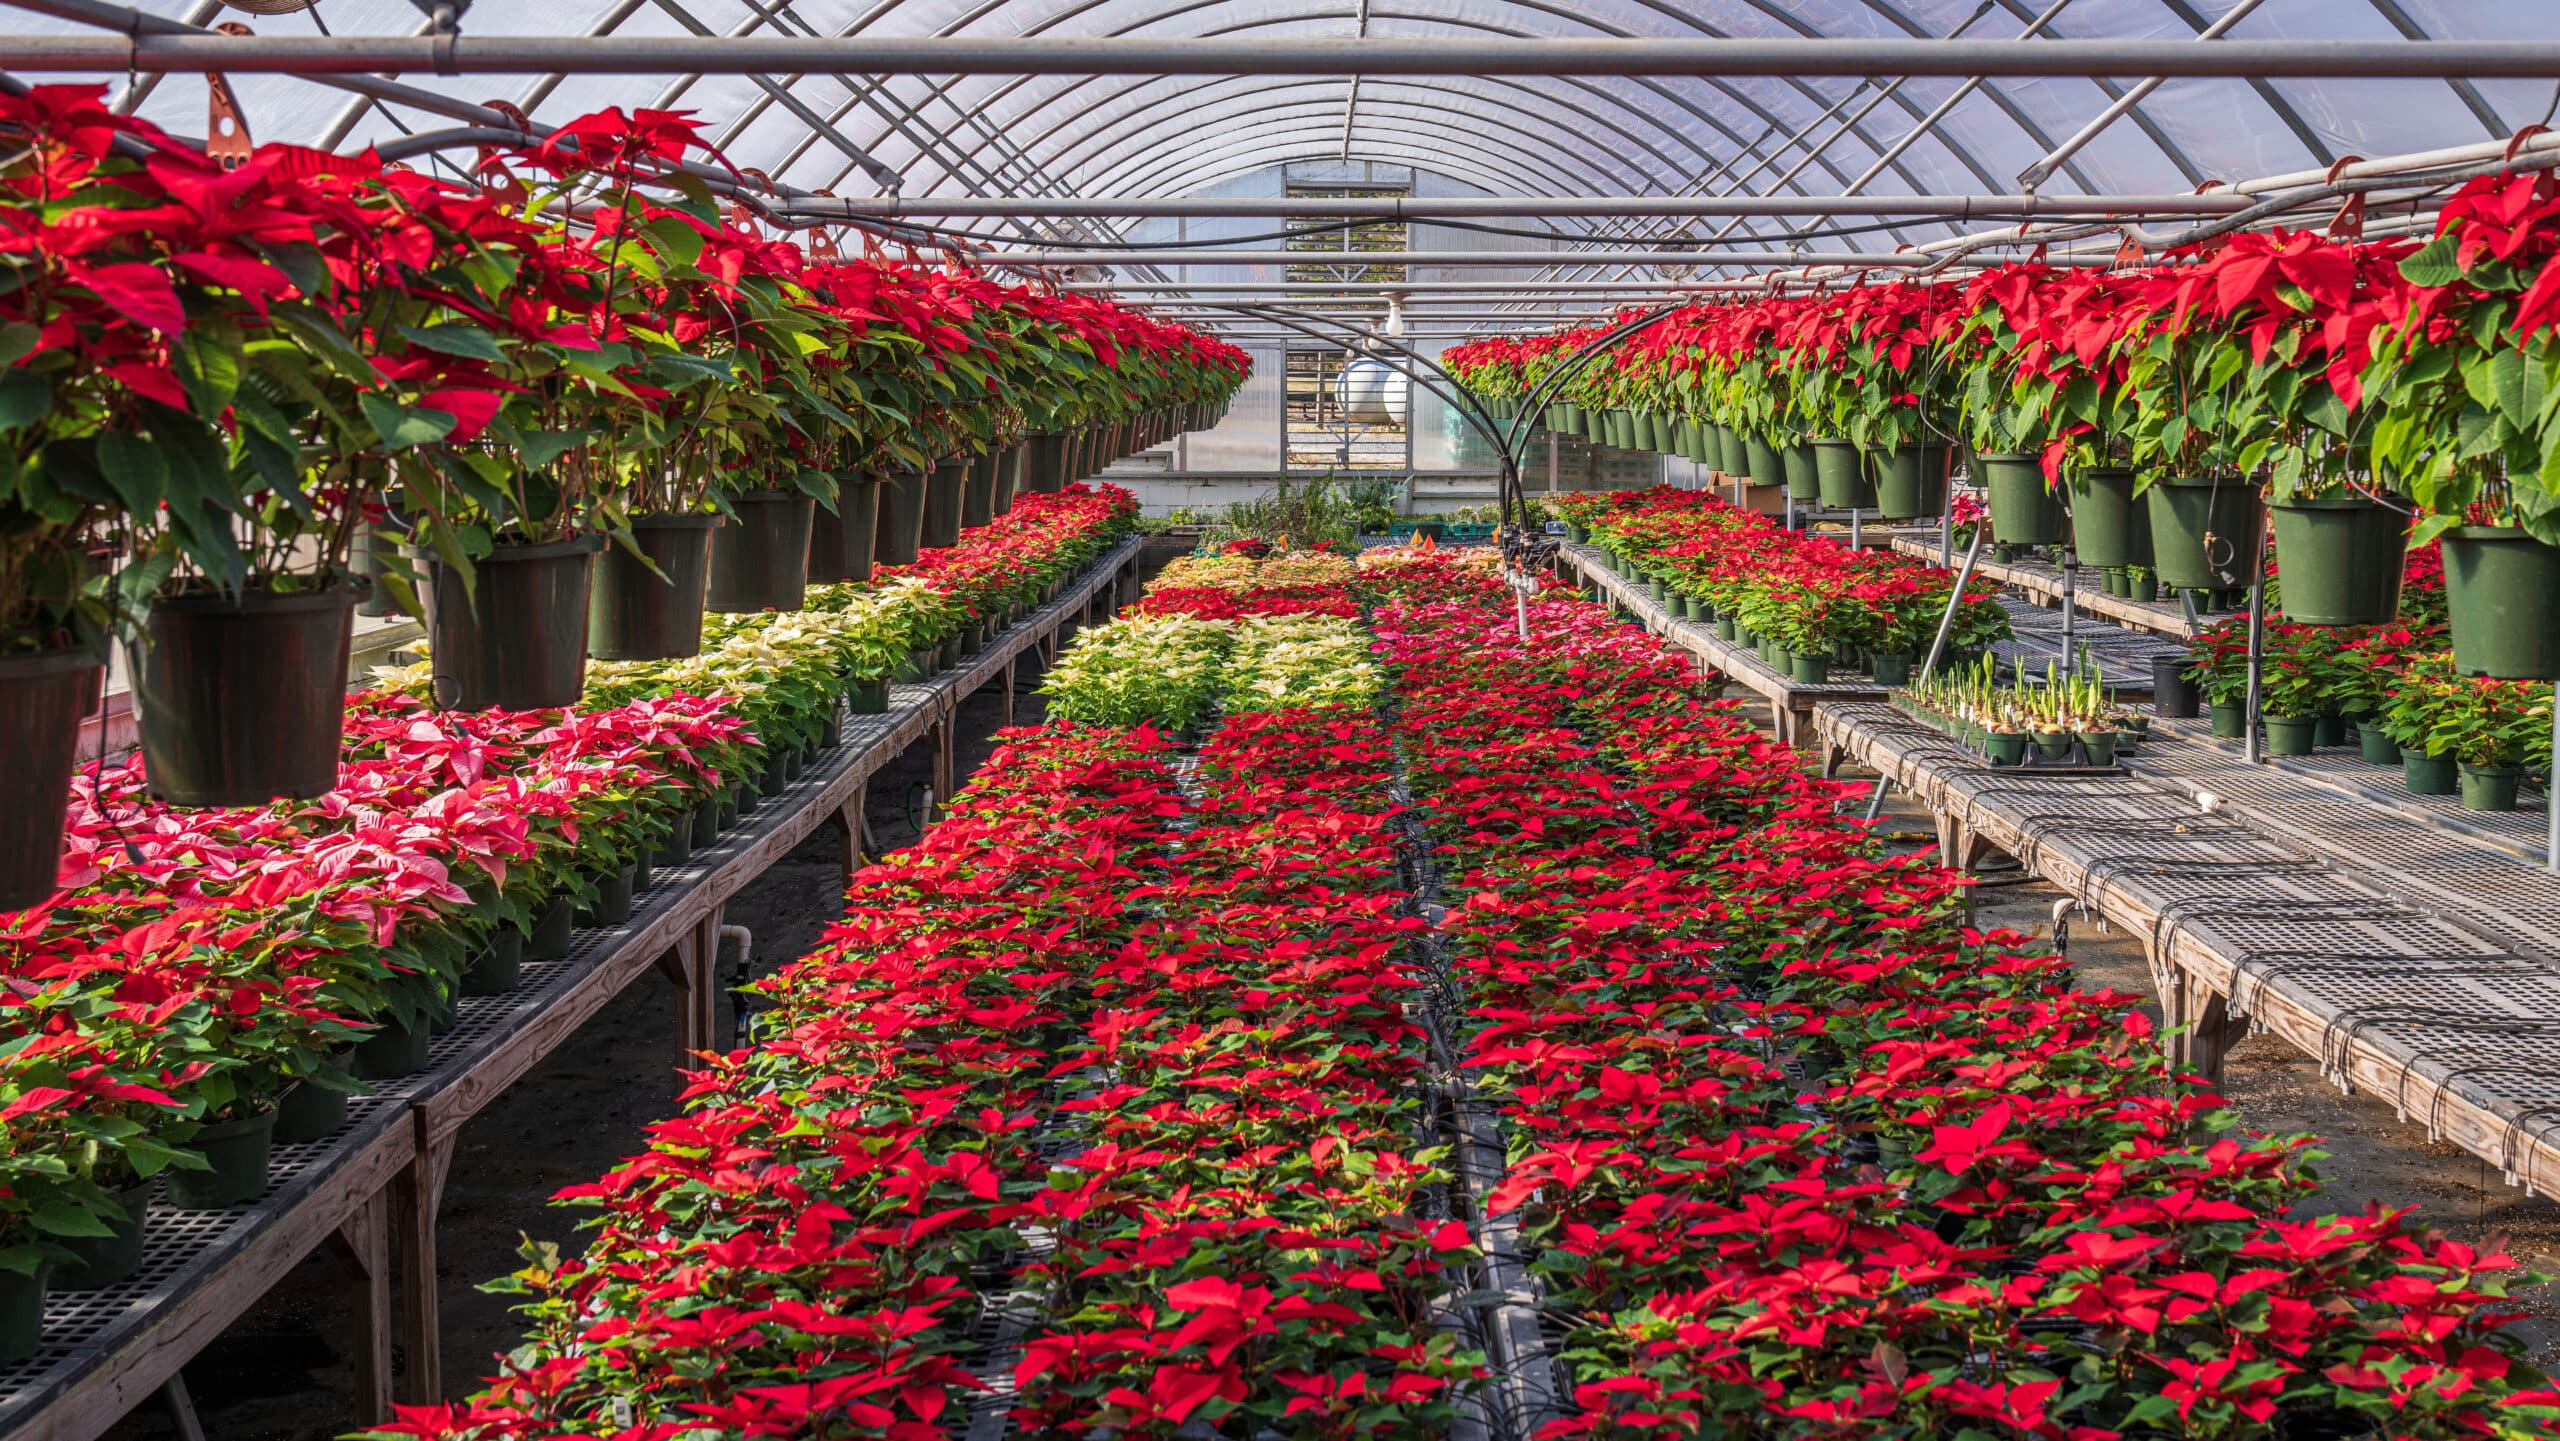 Poinsettias in a greenhouse.